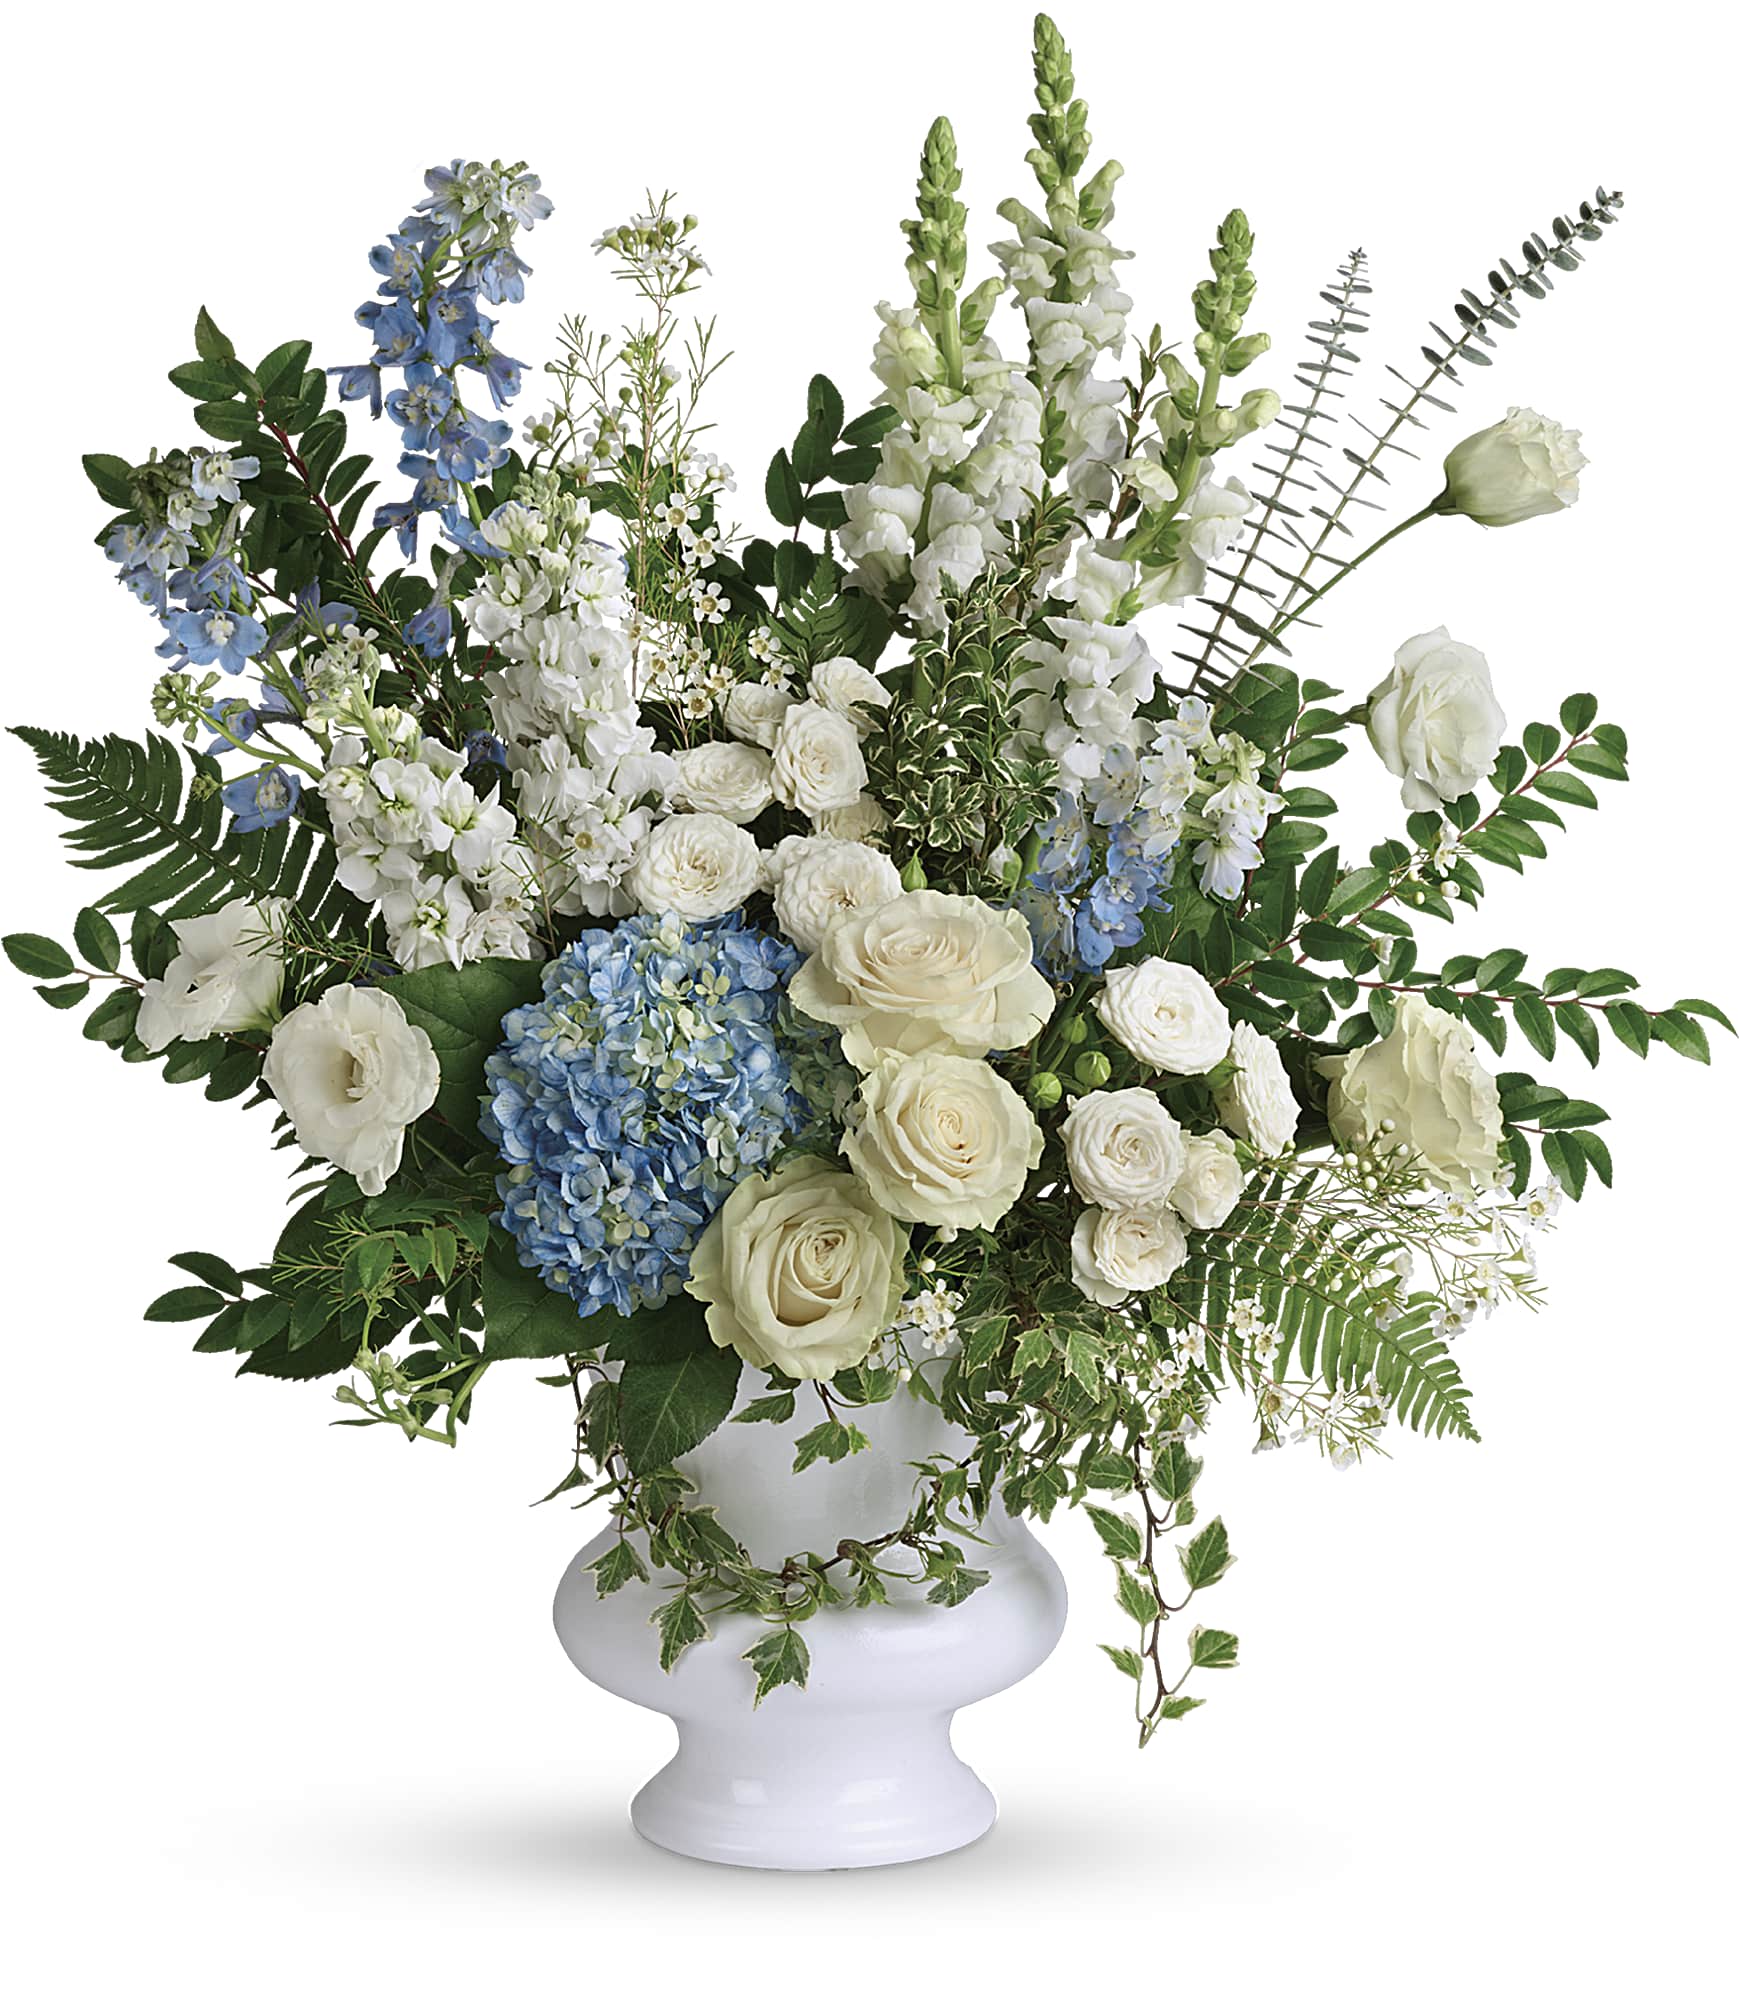 Treasured and Beloved bouquet by Teleflora - A beautiful expression of love and sympathy in soft blue white and green arrangement featuring hydrangea, delphinium, lilies, and roses. 